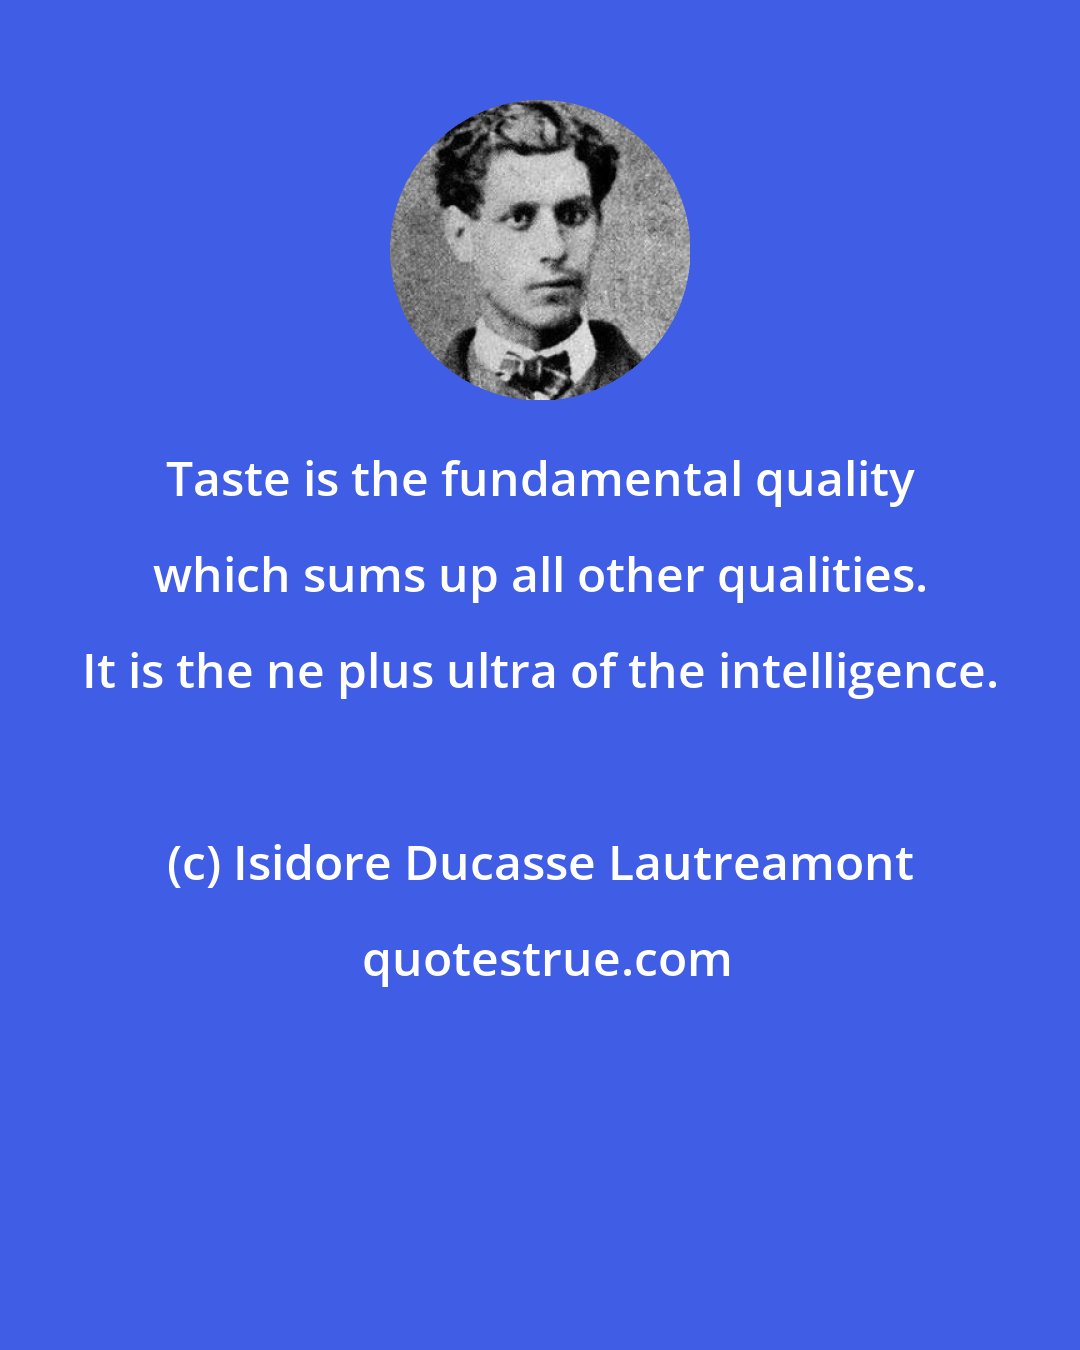 Isidore Ducasse Lautreamont: Taste is the fundamental quality which sums up all other qualities. It is the ne plus ultra of the intelligence.